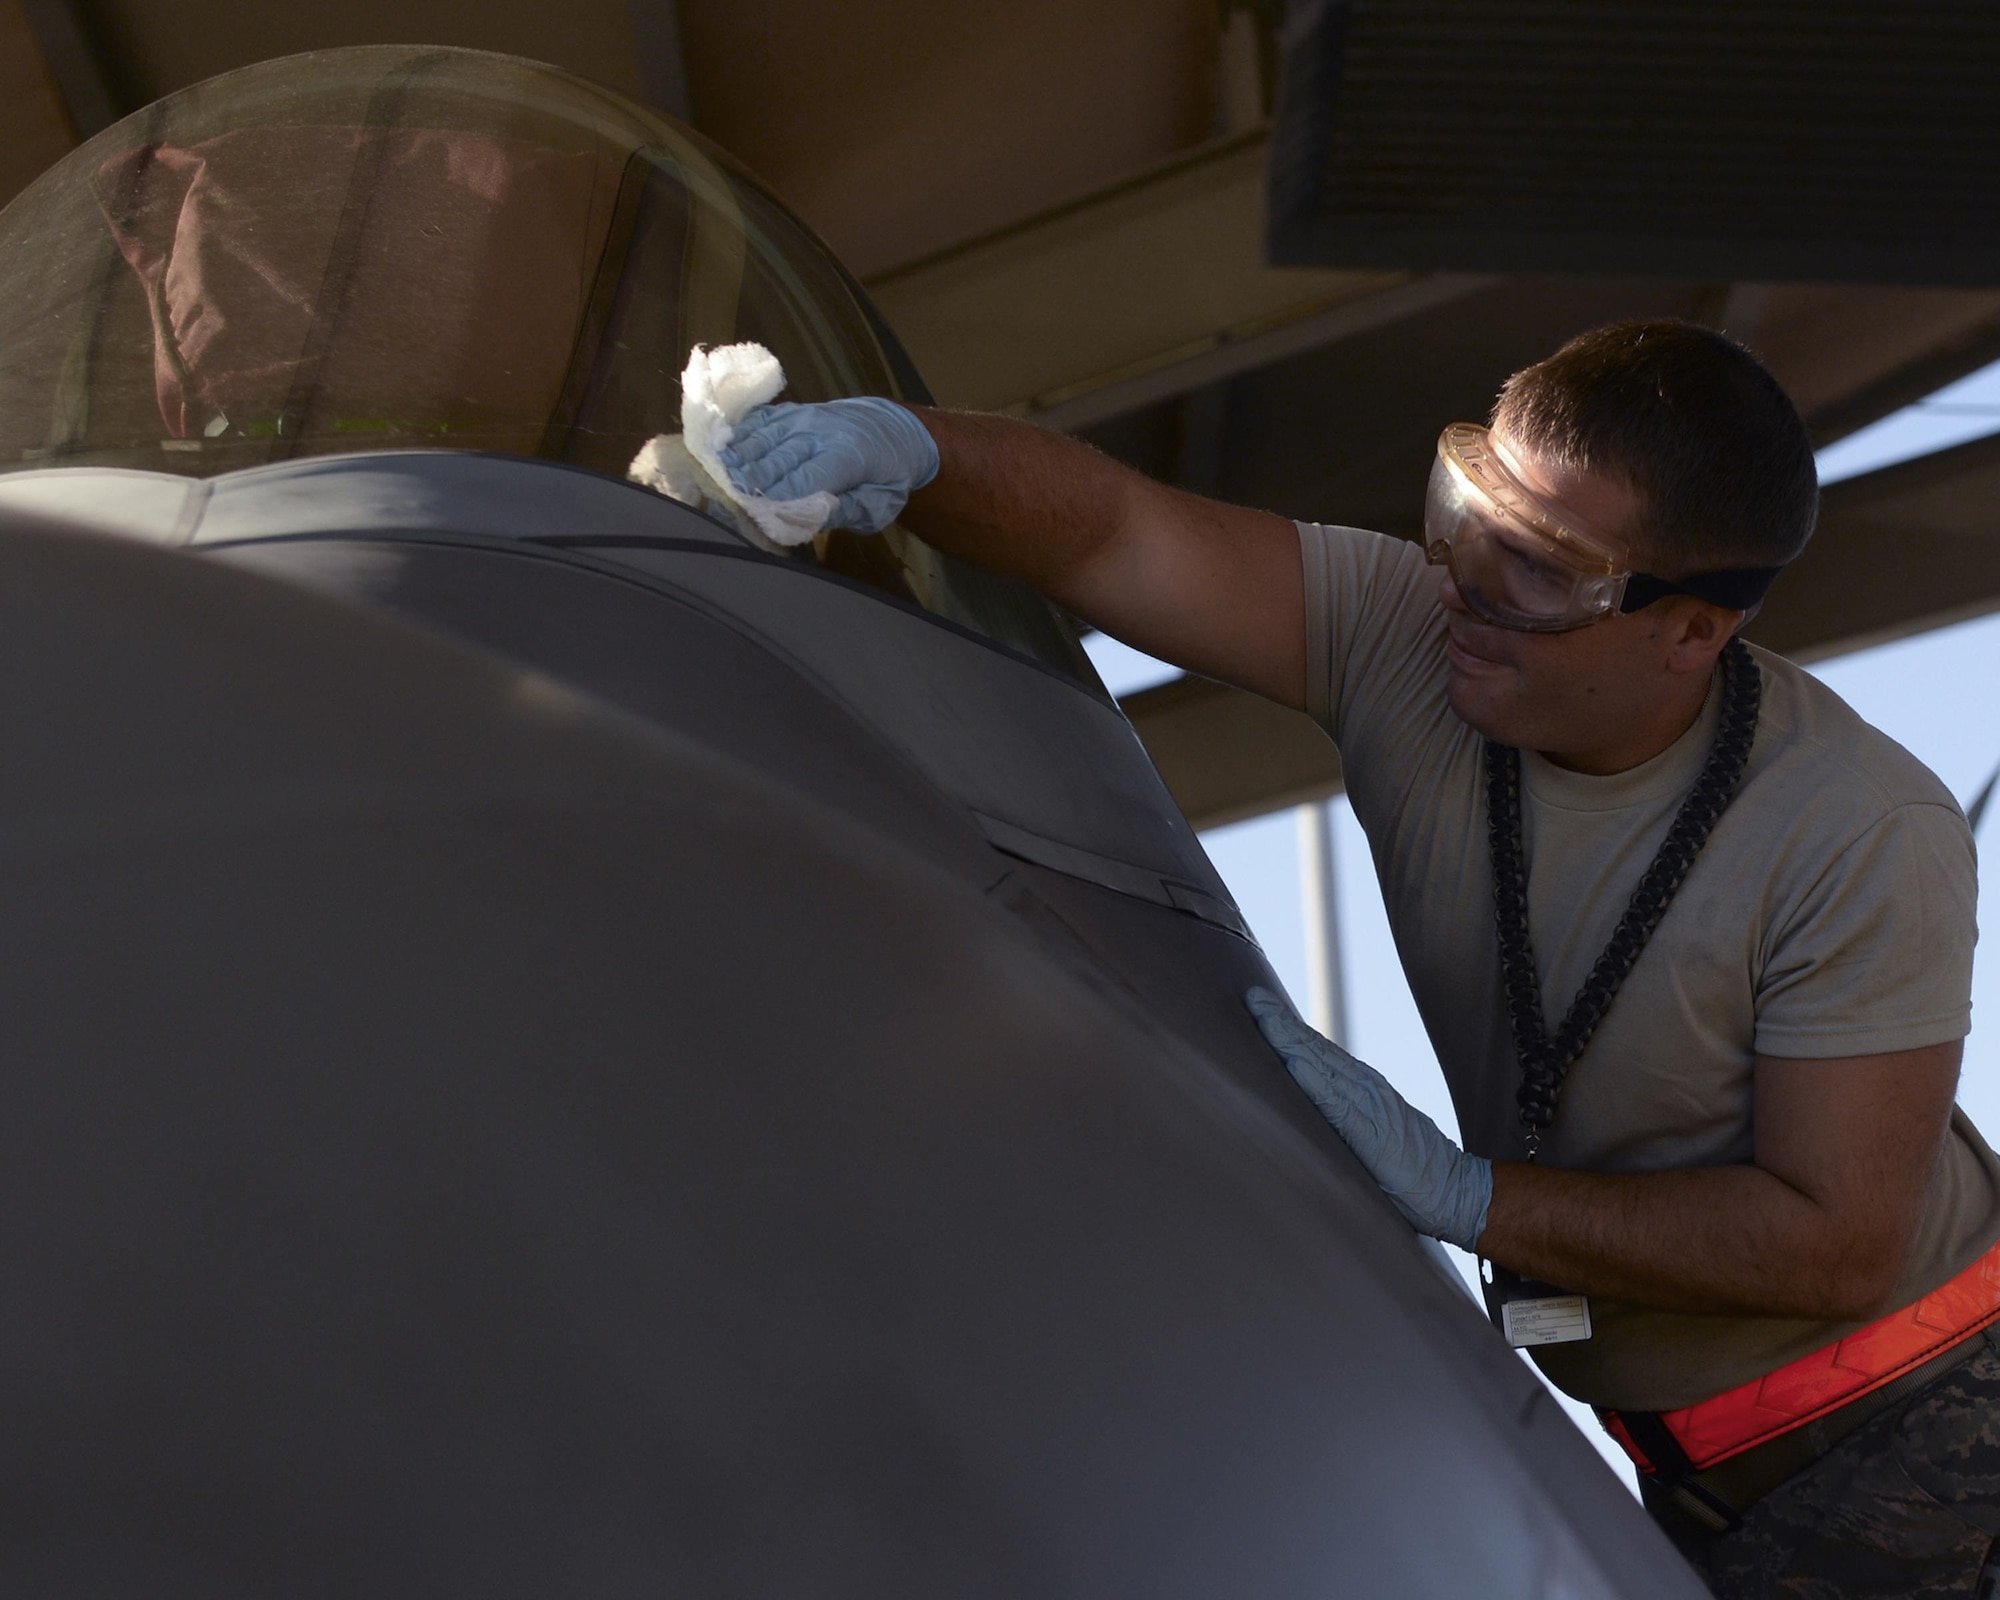 U.S. Air Force Senior Airman Jared Carnahan, 44th Fighter Group crew chief, cleans the windshield of an F-22 Raptor on the flightline at Tyndall Air Force Base, Fla., Sept. 10, 2016. In addition to maintaining and repairing the F-22, crew chiefs at Tyndall also ensure the jet is in perfect condition before the pilot enters the jet. The 44th FG accomplishes total force integration by providing pilots, maintainers and support personnel in partnership with the 325th Fighter Wing to execute the Tyndall mission to train and project unrivaled combat air power. (U.S. Air Force photo by Airman 1st Class Cody R. Miller/Released)